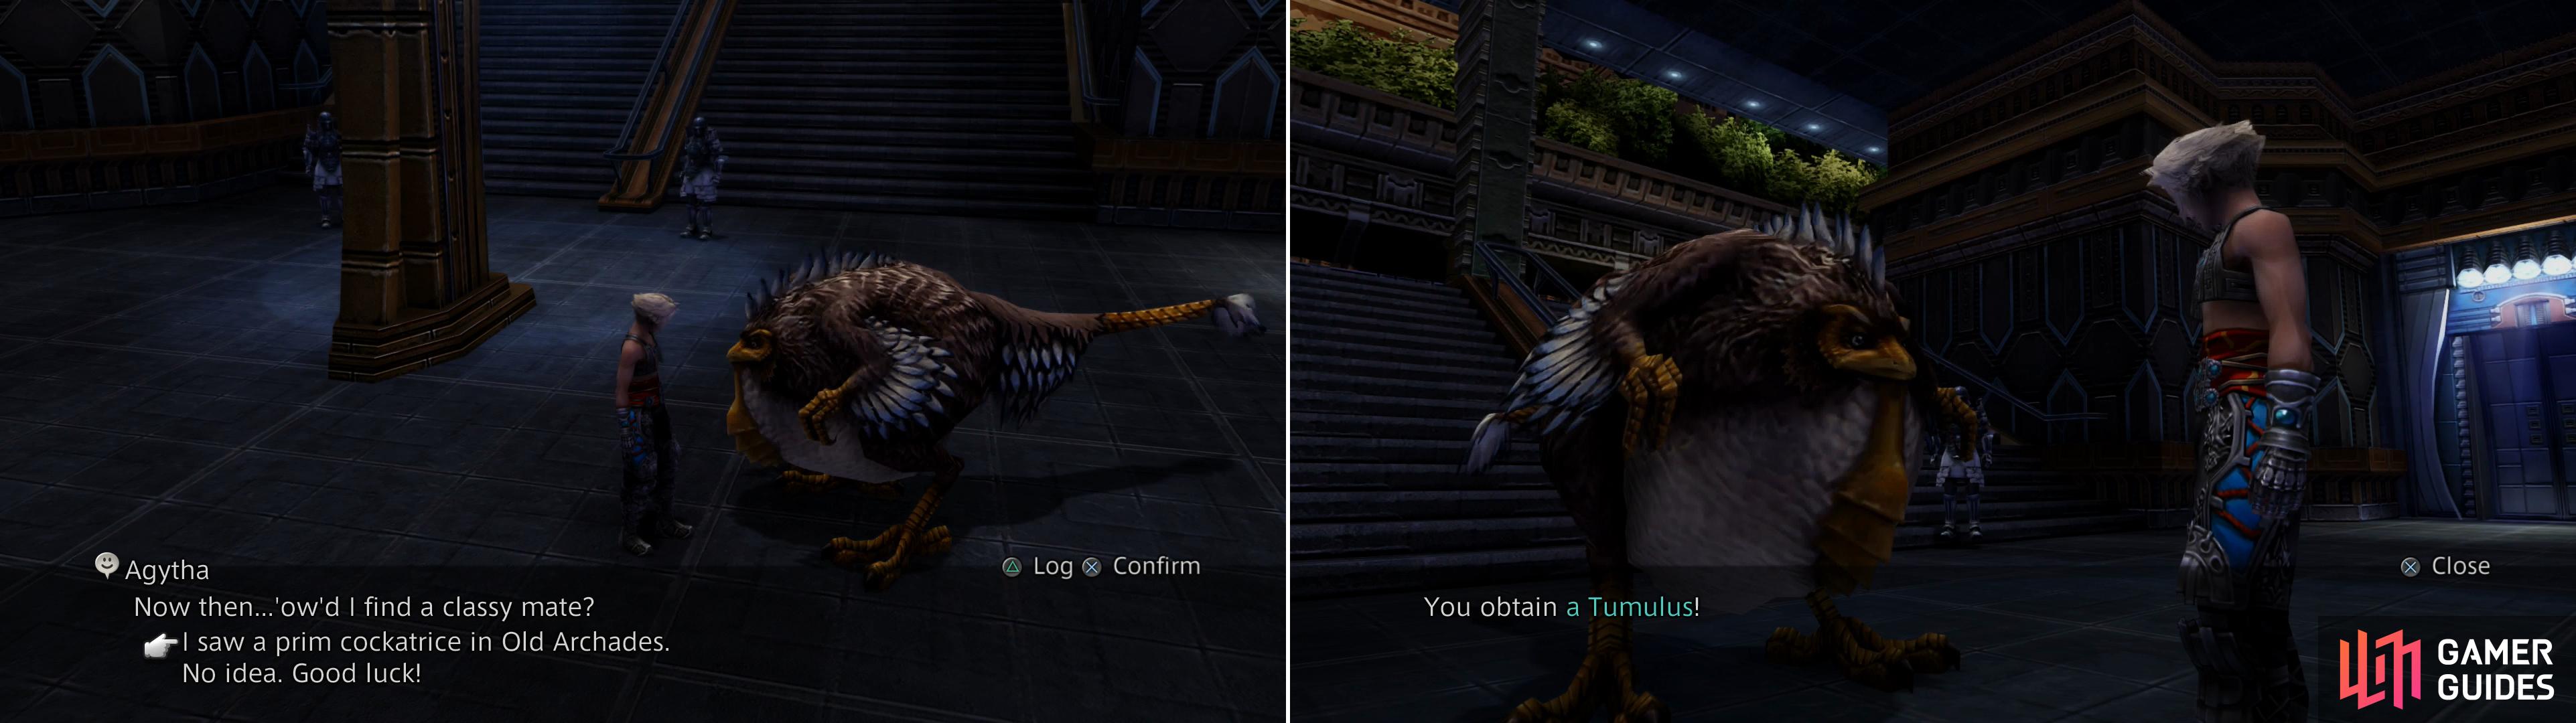 Chase down Agytha in the Grand Arcade and tell her about the Cockatrice you found in Old Archades (left) and she’ll give you a Tumulus (right).